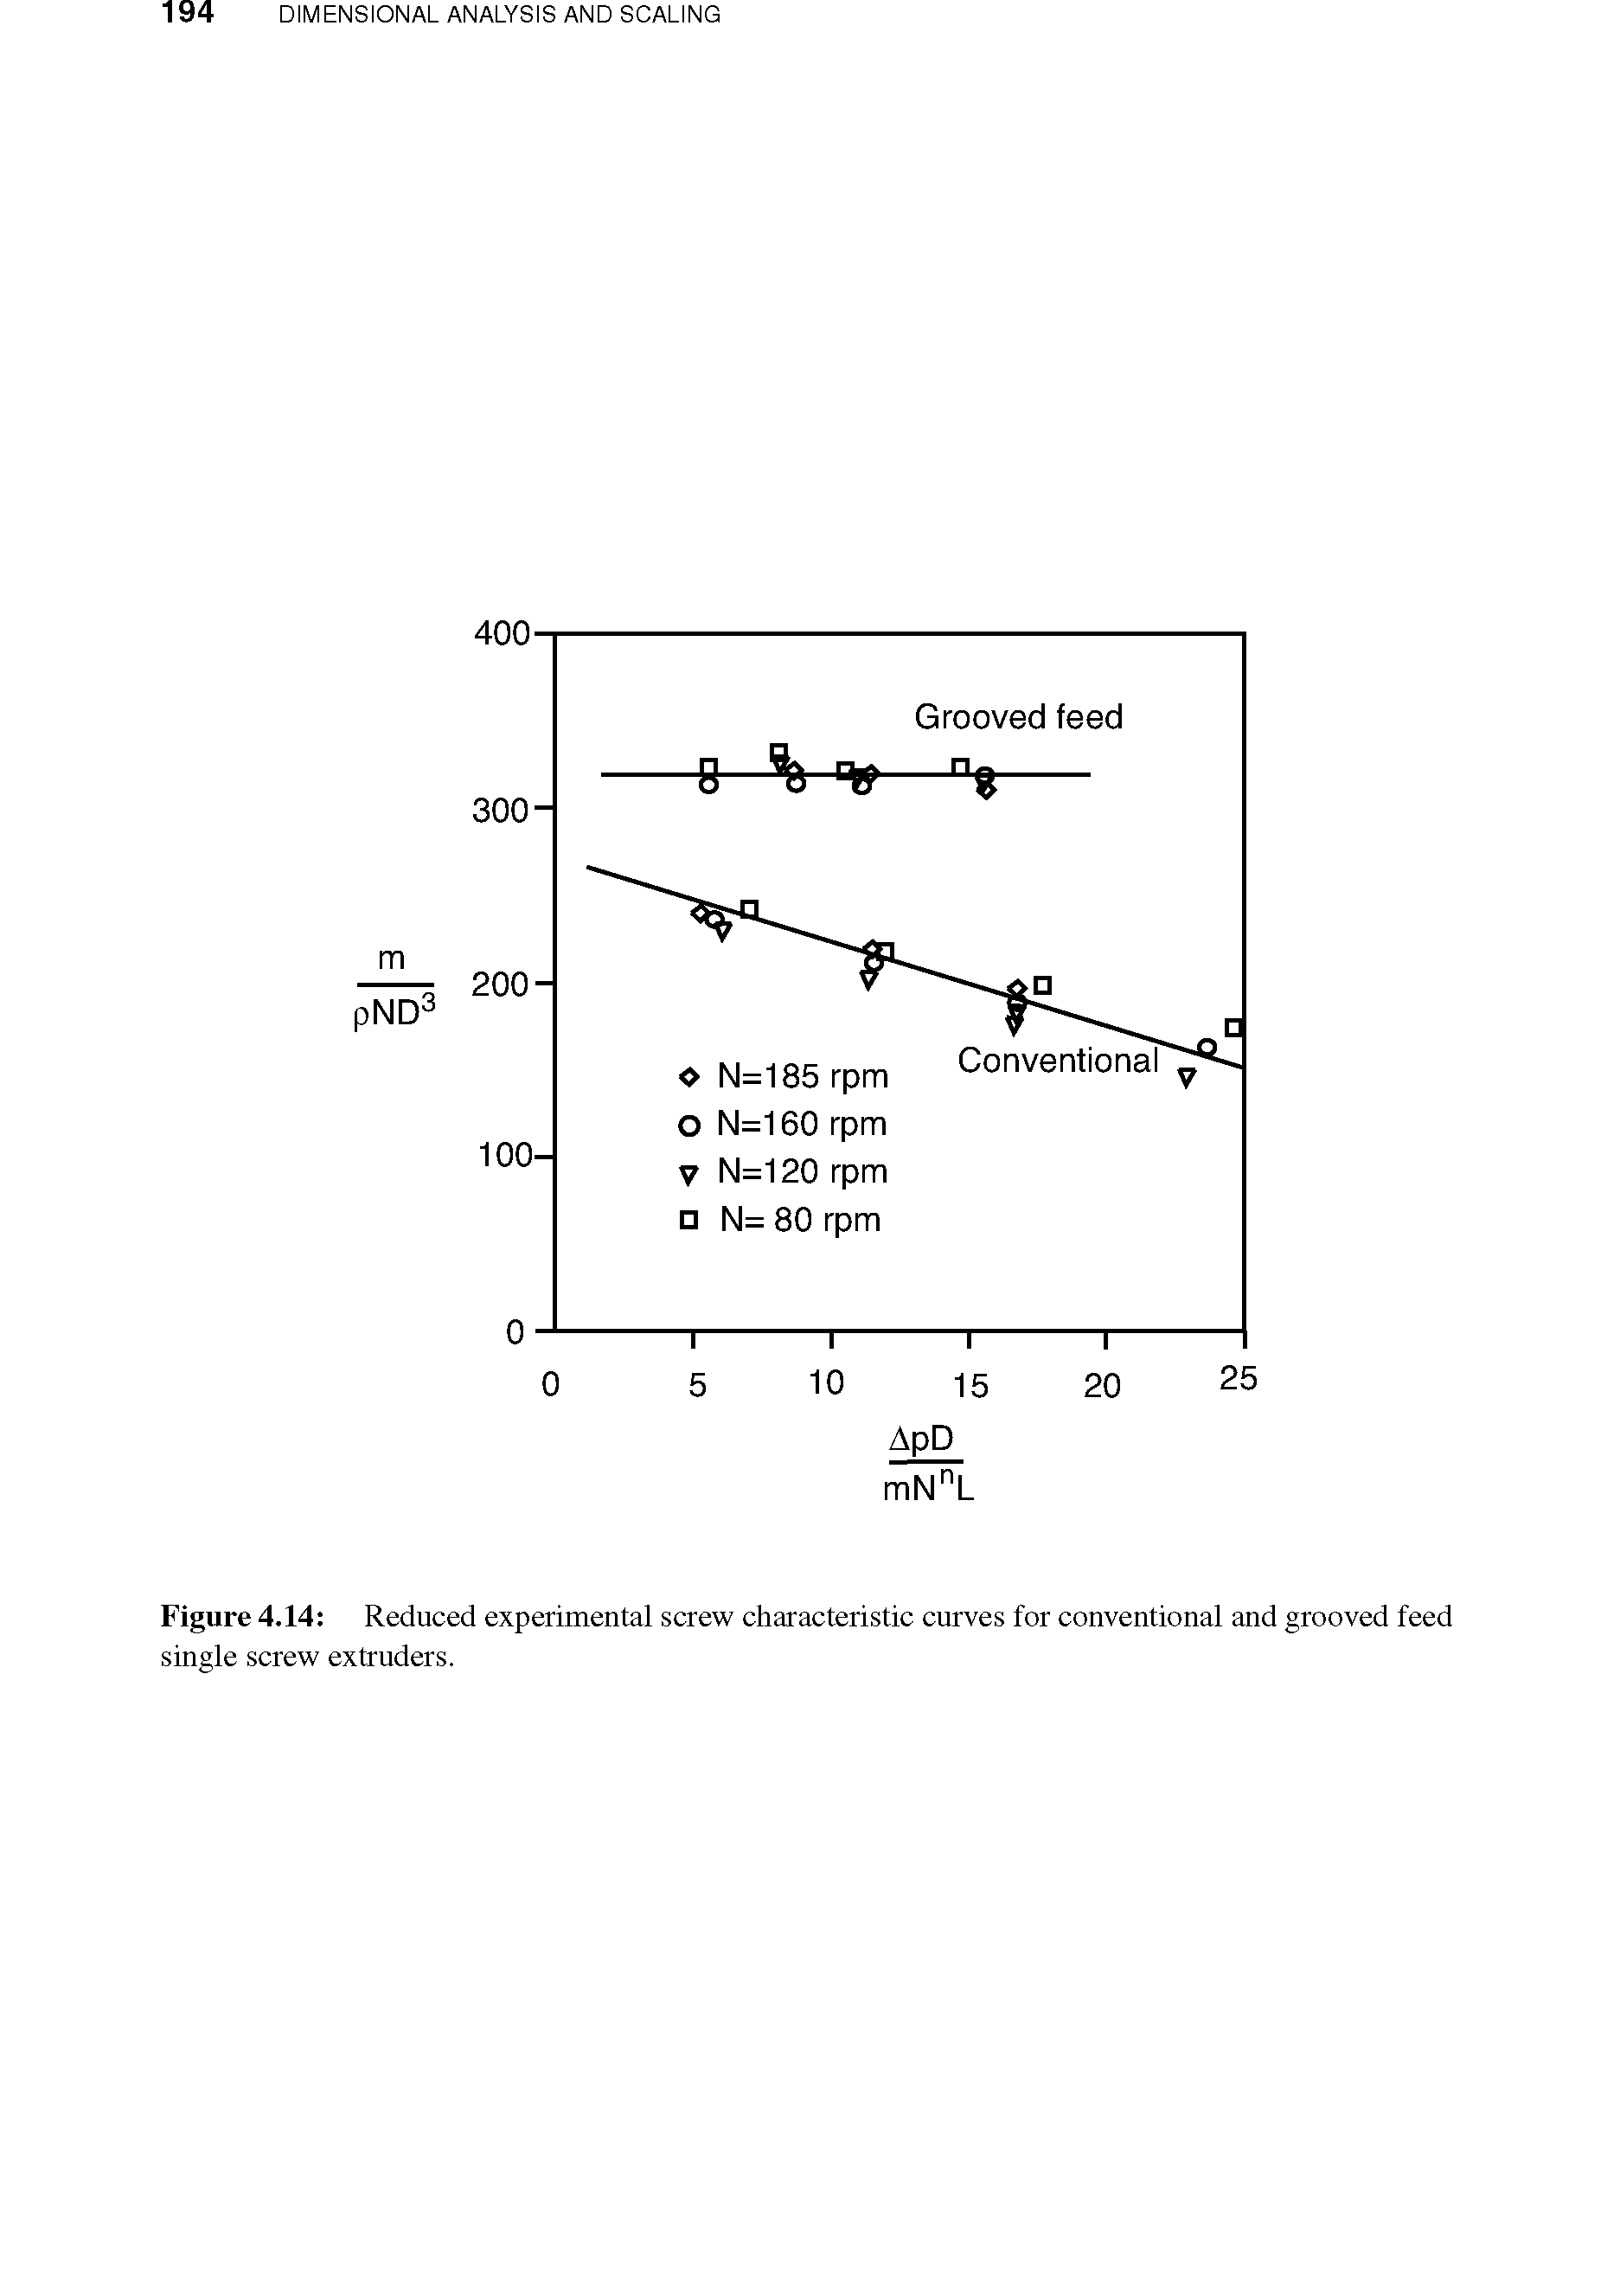 Figure 4.14 Reduced experimental screw characteristic curves for conventional and grooved feed single screw extruders.